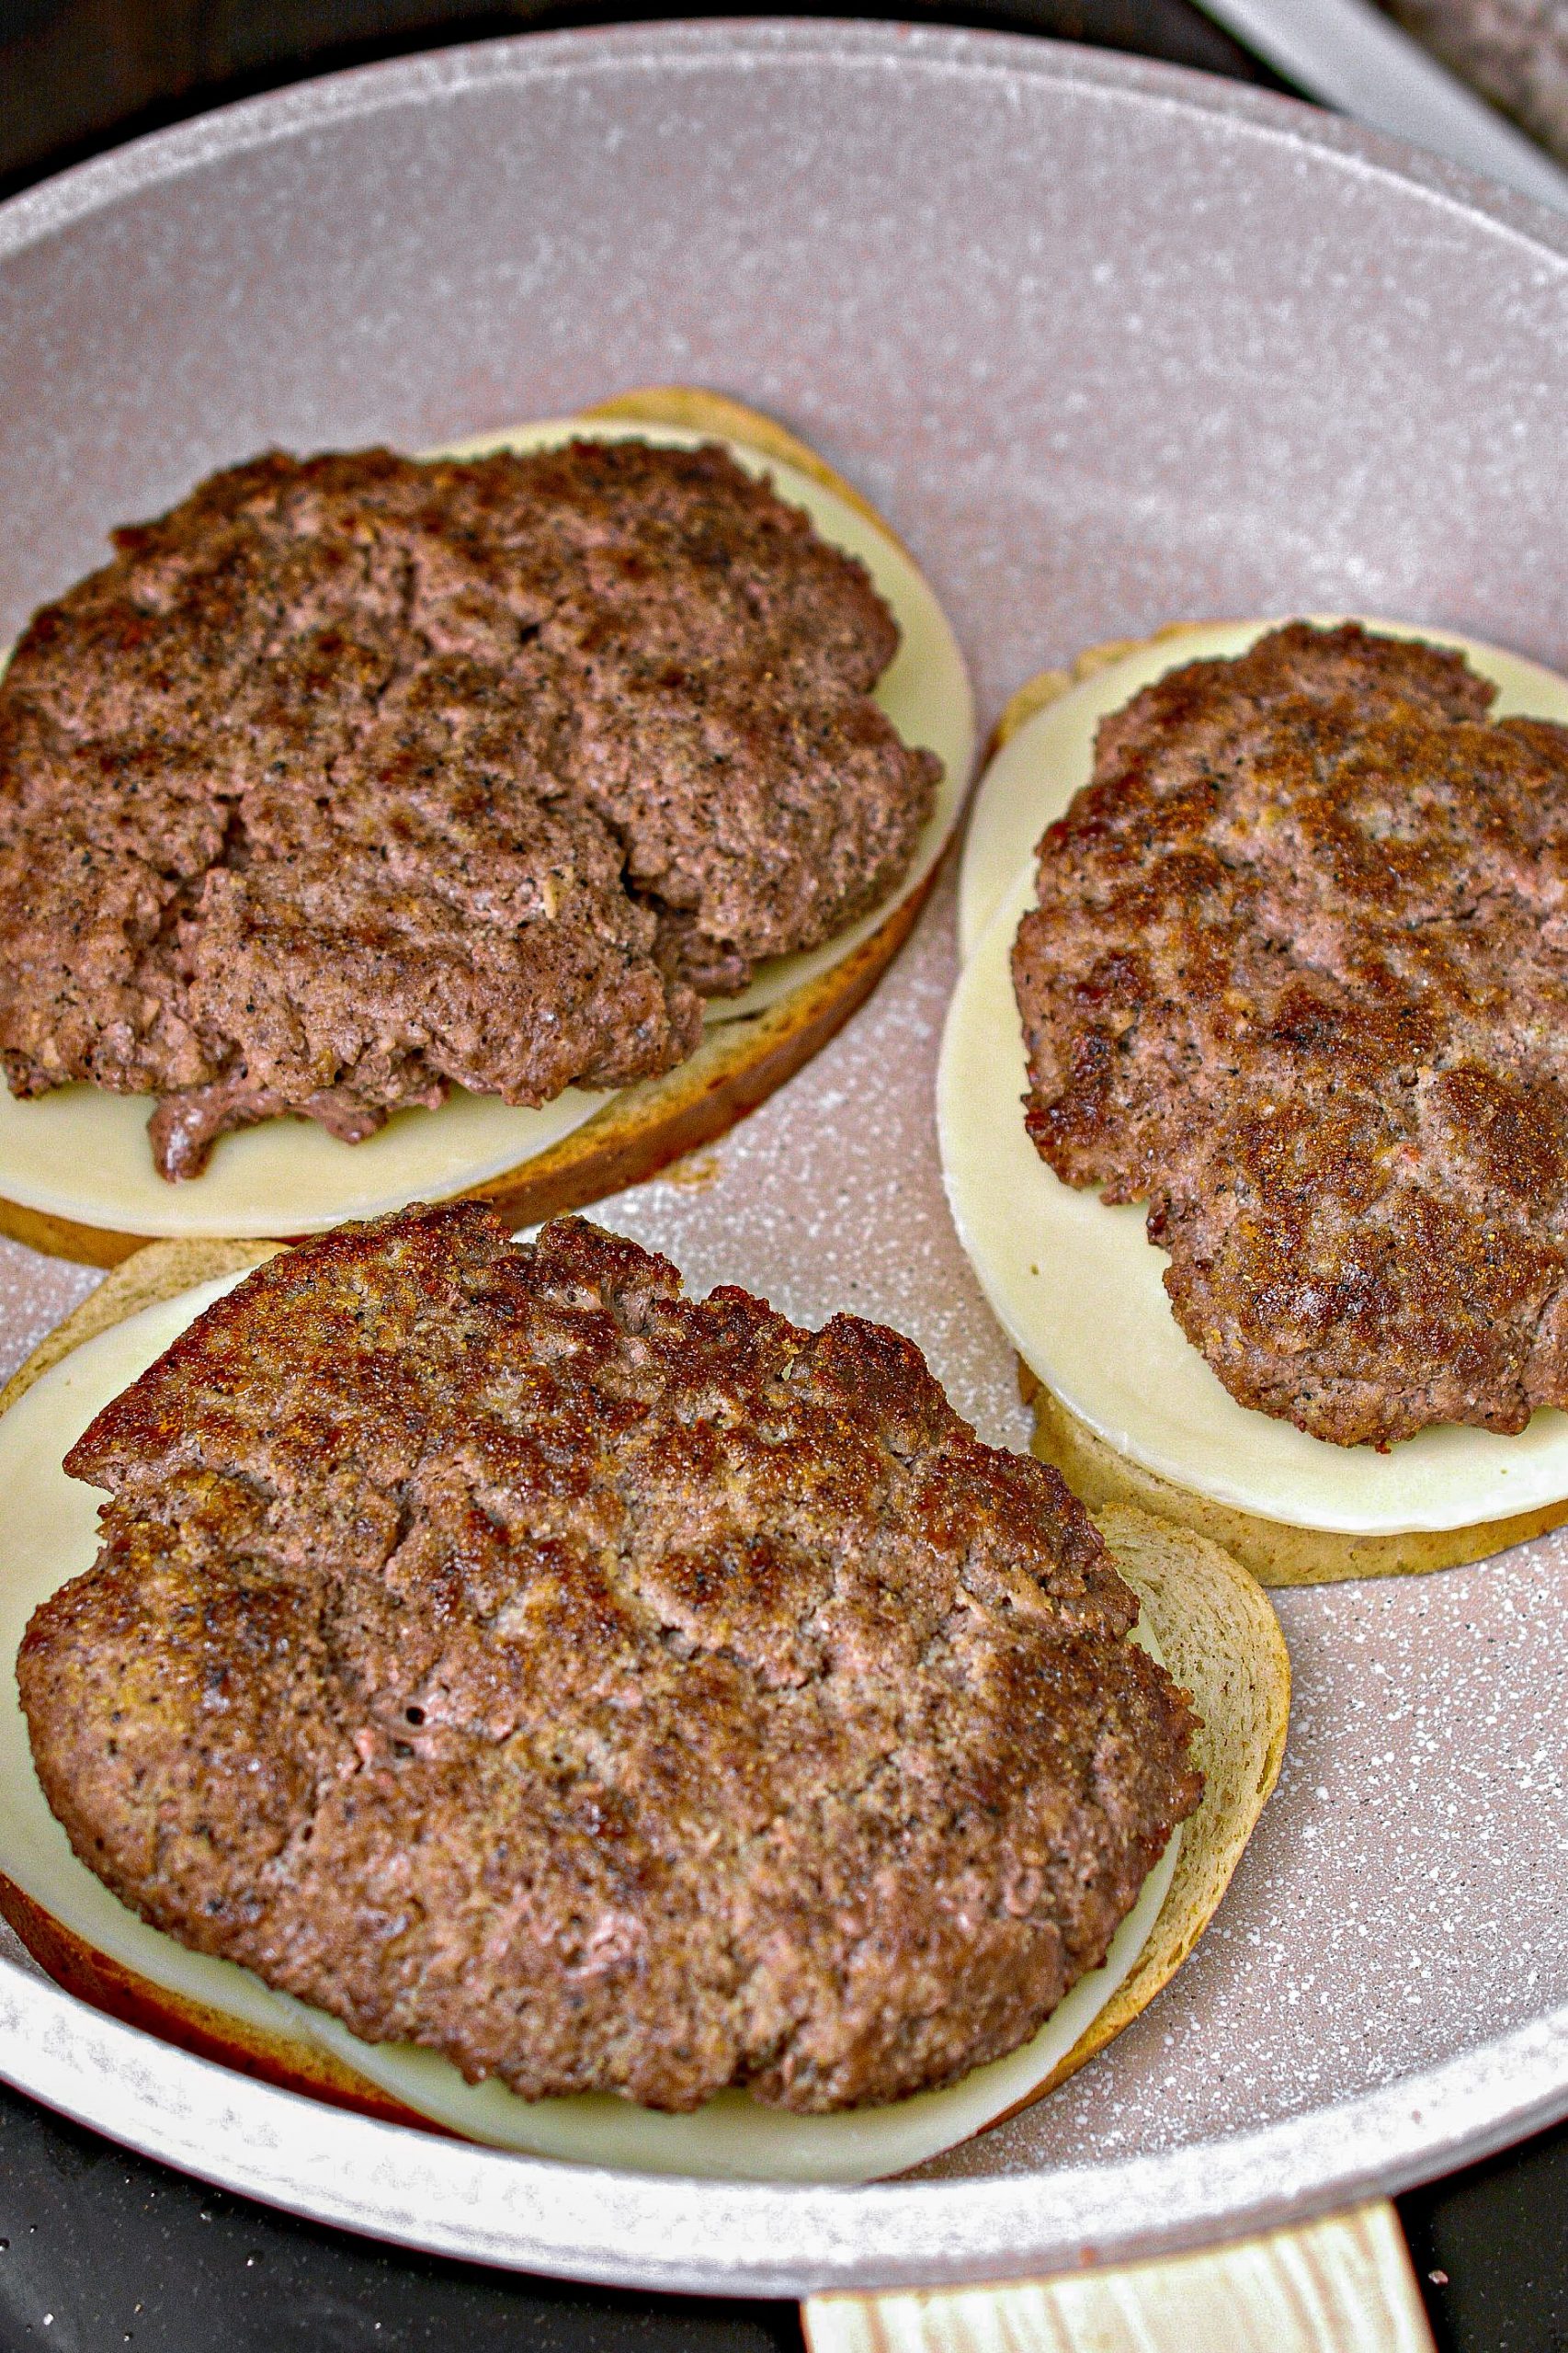 Top each slice of bread with 2 slices of provolone cheese, and a meat patty.